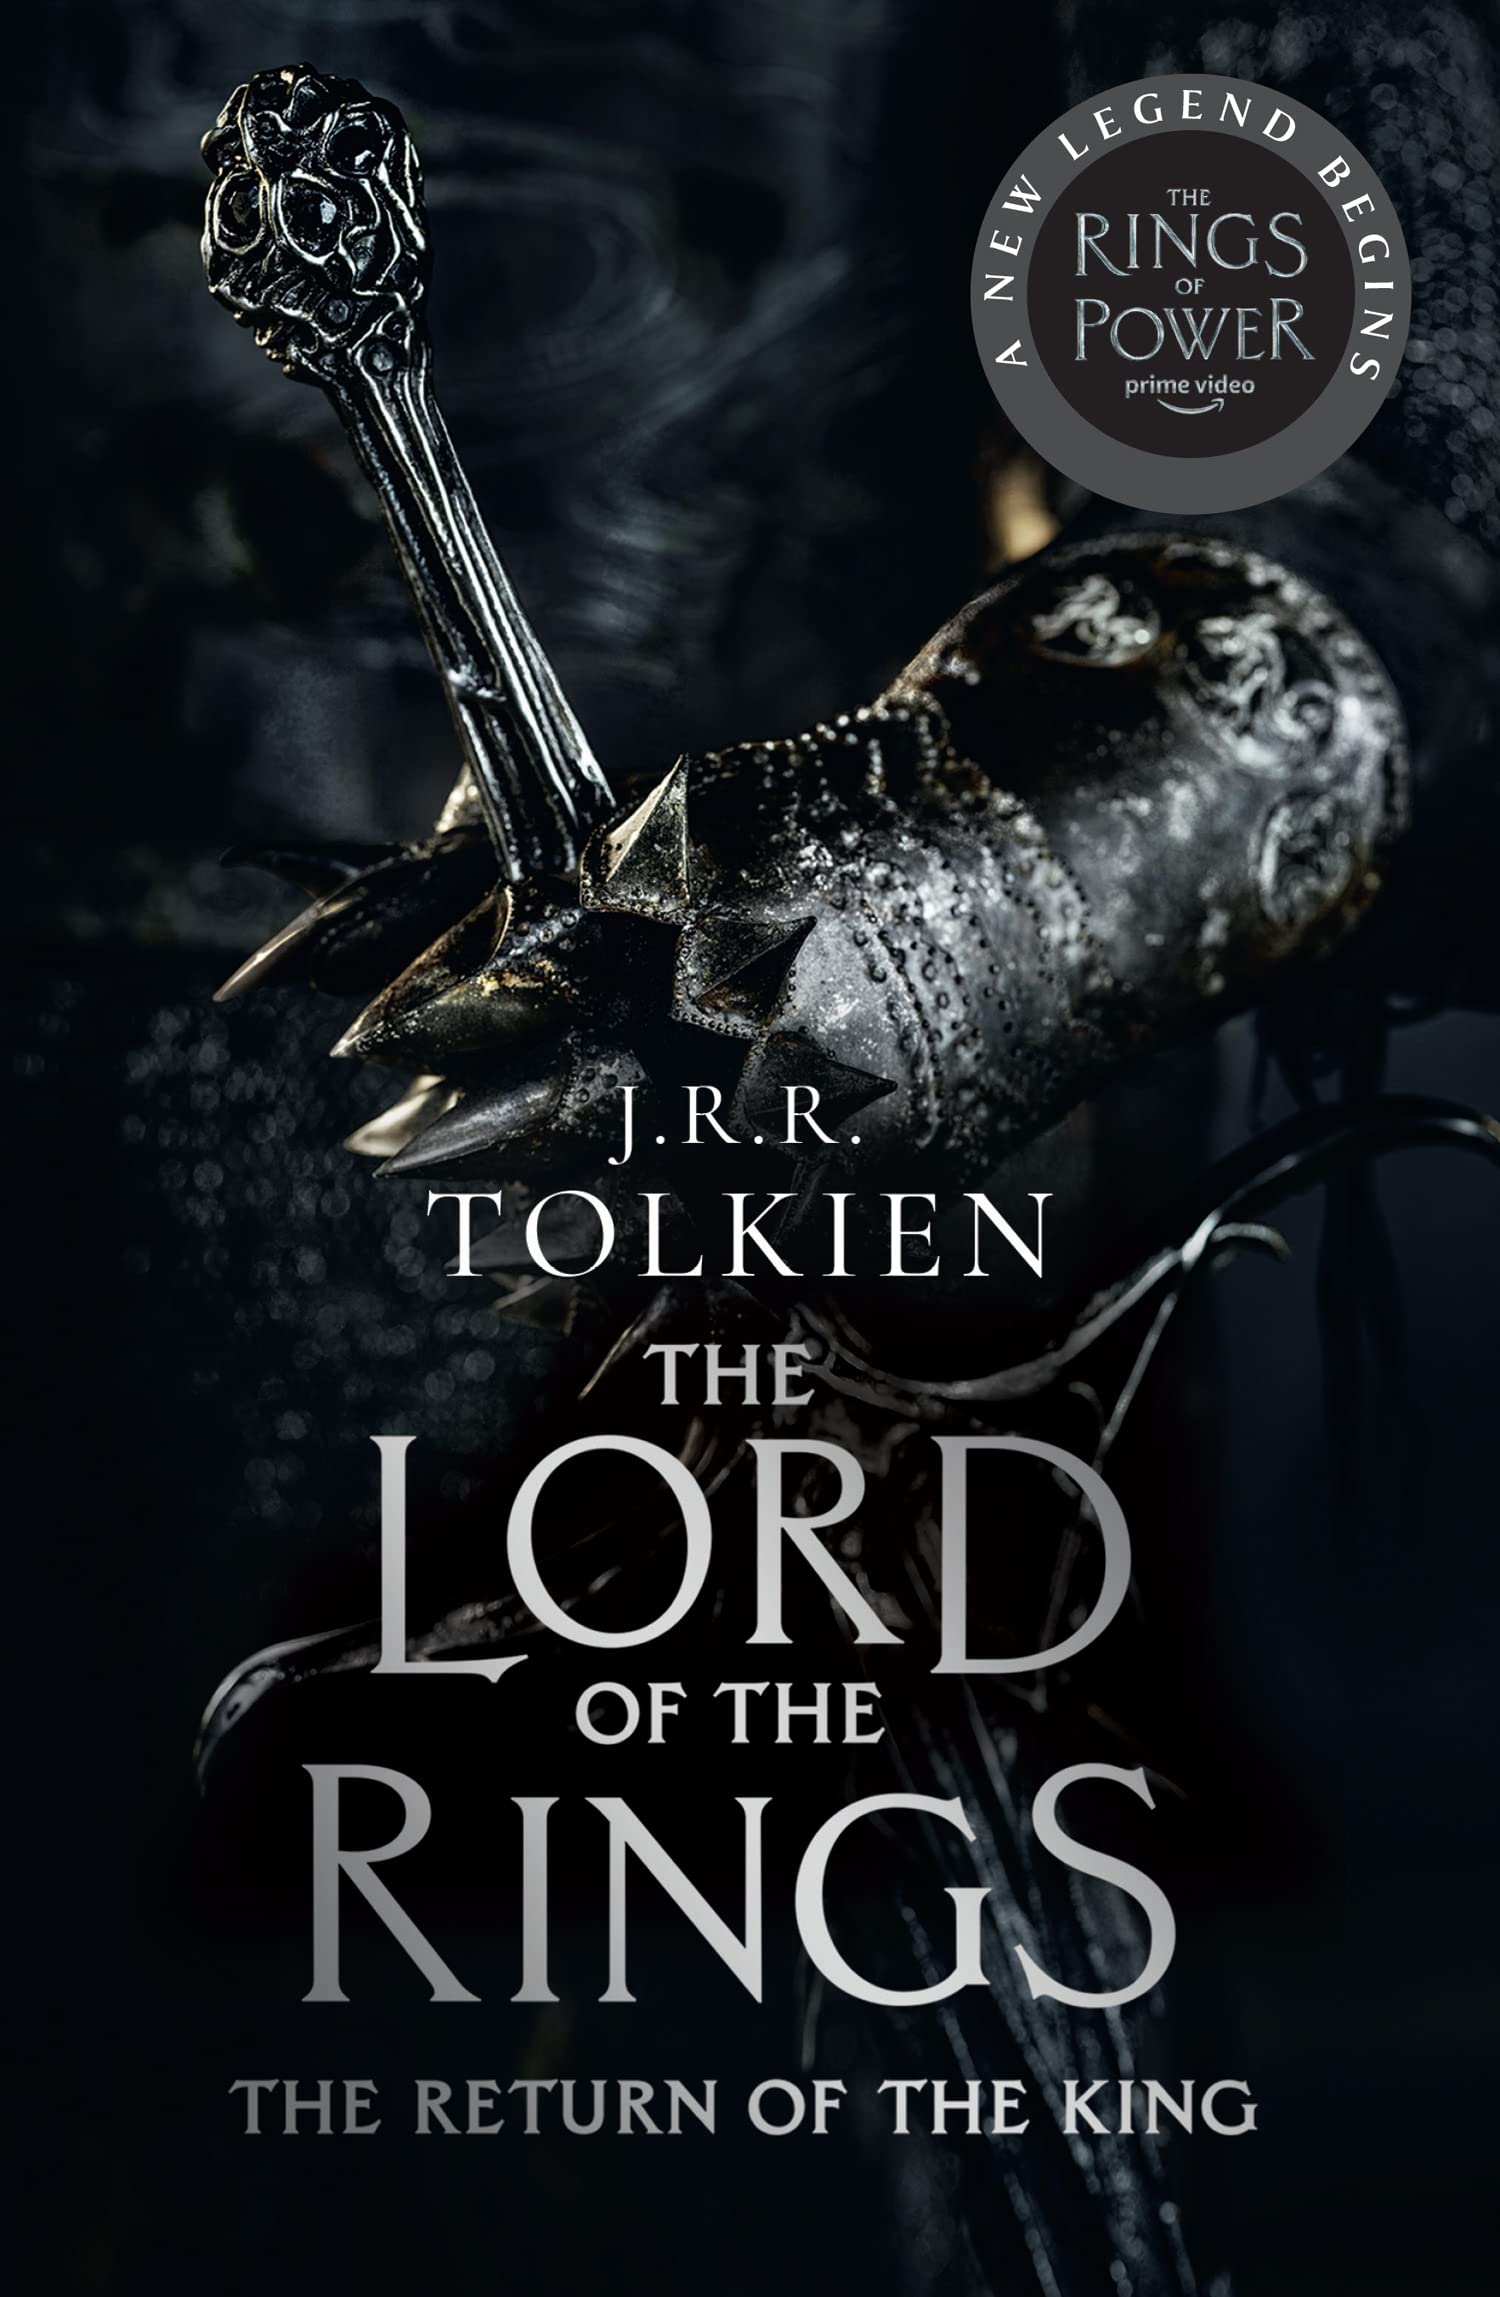 Lord of the Rings #3 : The Return of the King (Paperback, TV tie-in edition)